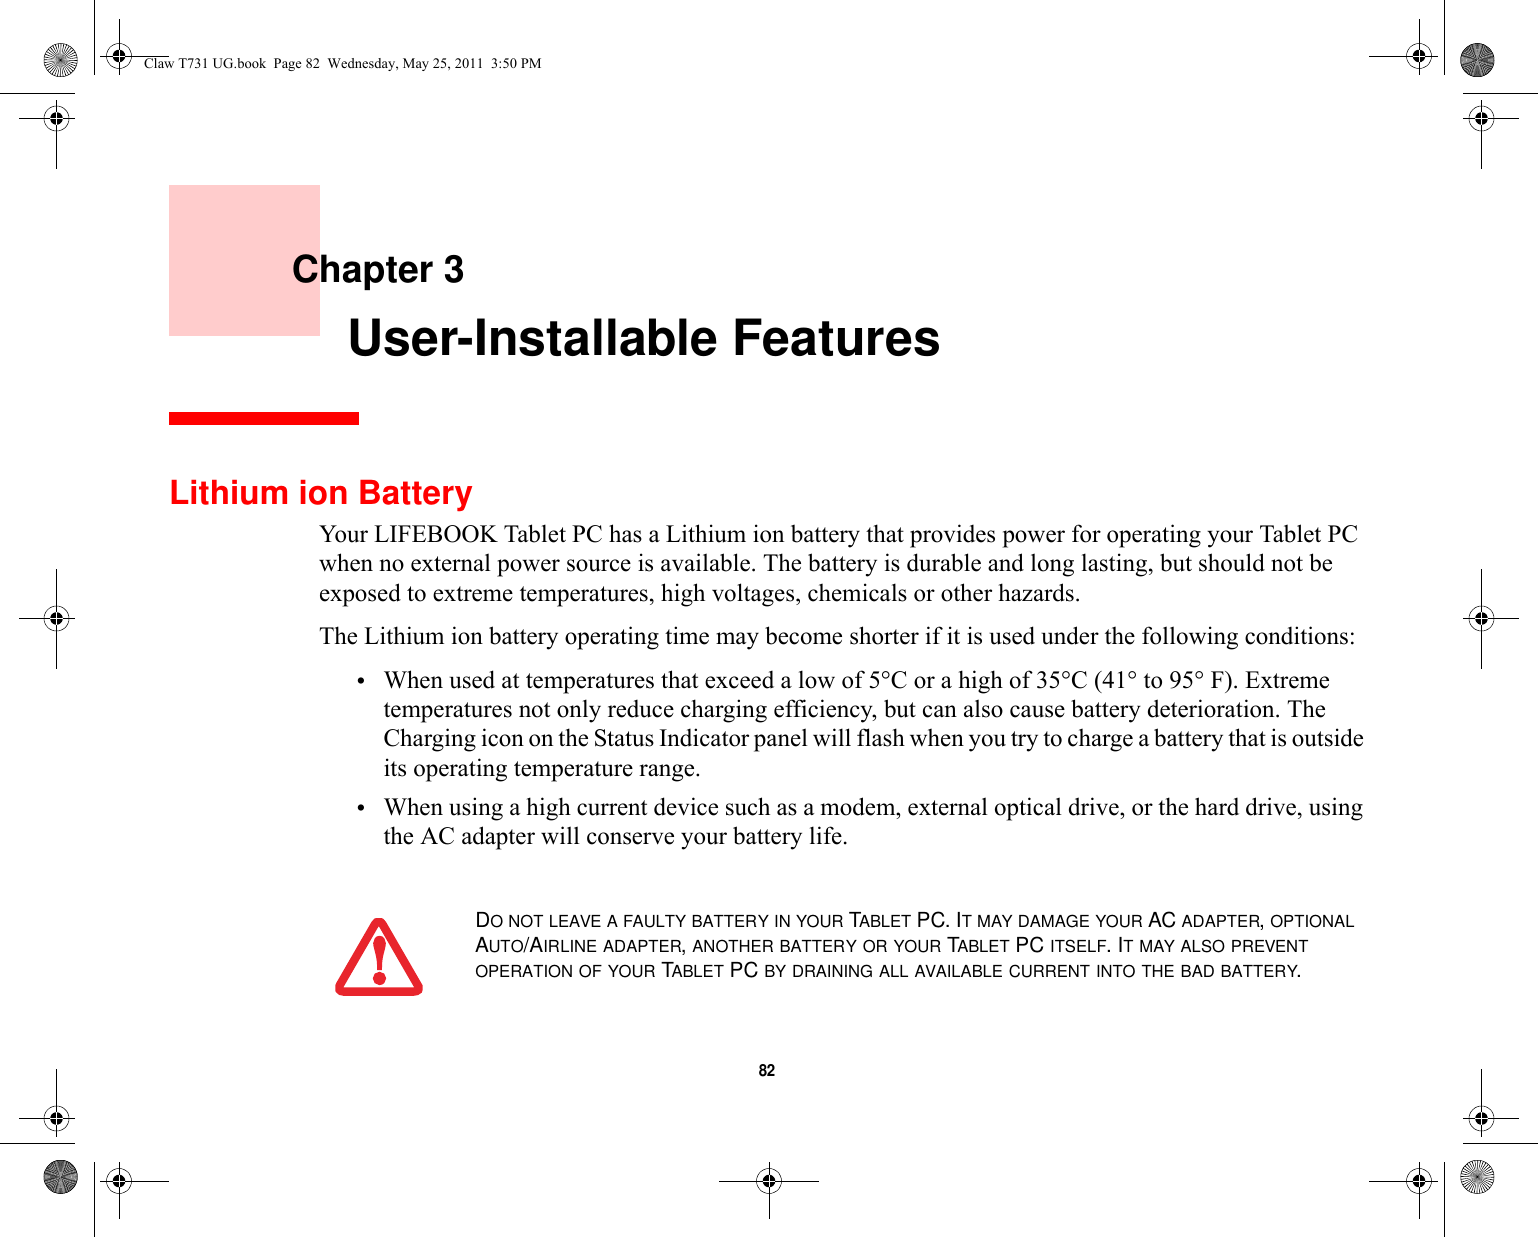 82     Chapter 3    User-Installable FeaturesLithium ion BatteryYour LIFEBOOK Tablet PC has a Lithium ion battery that provides power for operating your Tablet PC when no external power source is available. The battery is durable and long lasting, but should not be exposed to extreme temperatures, high voltages, chemicals or other hazards.The Lithium ion battery operating time may become shorter if it is used under the following conditions:•When used at temperatures that exceed a low of 5°C or a high of 35°C (41° to 95° F). Extreme temperatures not only reduce charging efficiency, but can also cause battery deterioration. The Charging icon on the Status Indicator panel will flash when you try to charge a battery that is outside its operating temperature range. •When using a high current device such as a modem, external optical drive, or the hard drive, using the AC adapter will conserve your battery life.DO NOT LEAVE A FAULTY BATTERY IN YOUR TABLET PC. IT MAY DAMAGE YOUR AC ADAPTER, OPTIONAL AUTO/AIRLINE ADAPTER, ANOTHER BATTERY OR YOUR TABLET PC ITSELF. IT MAY ALSO PREVENT OPERATION OF YOUR TABLET PC BY DRAINING ALL AVAILABLE CURRENT INTO THE BAD BATTERY.Claw T731 UG.book  Page 82  Wednesday, May 25, 2011  3:50 PM